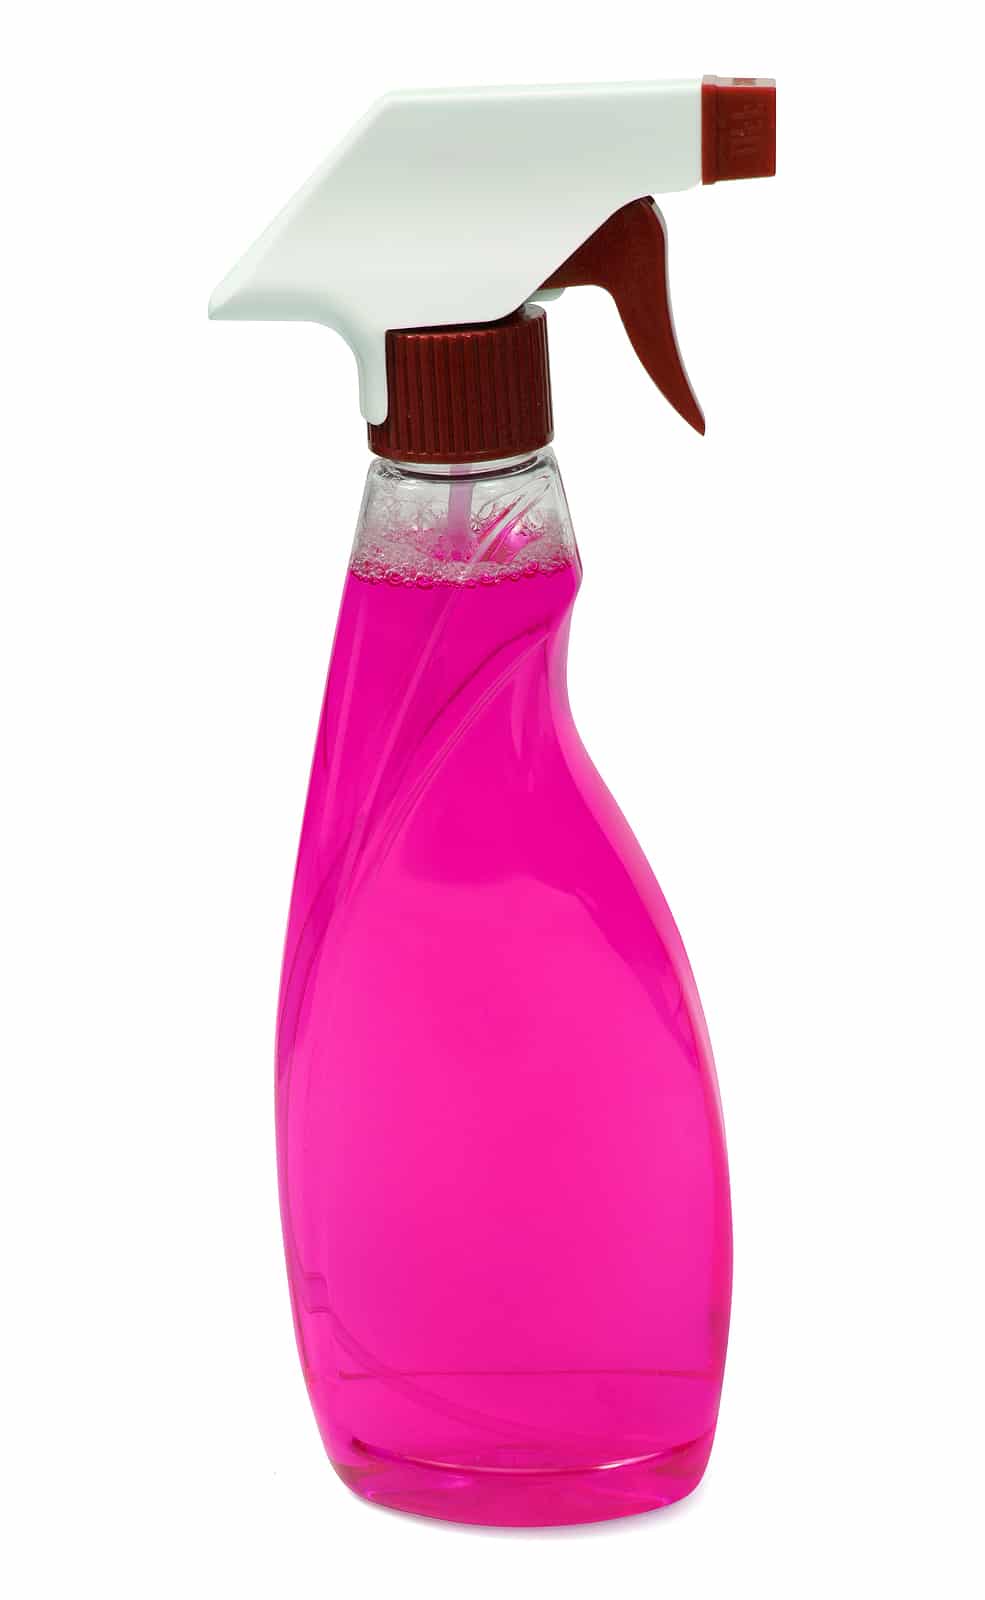 A Colorful Spray Bottle